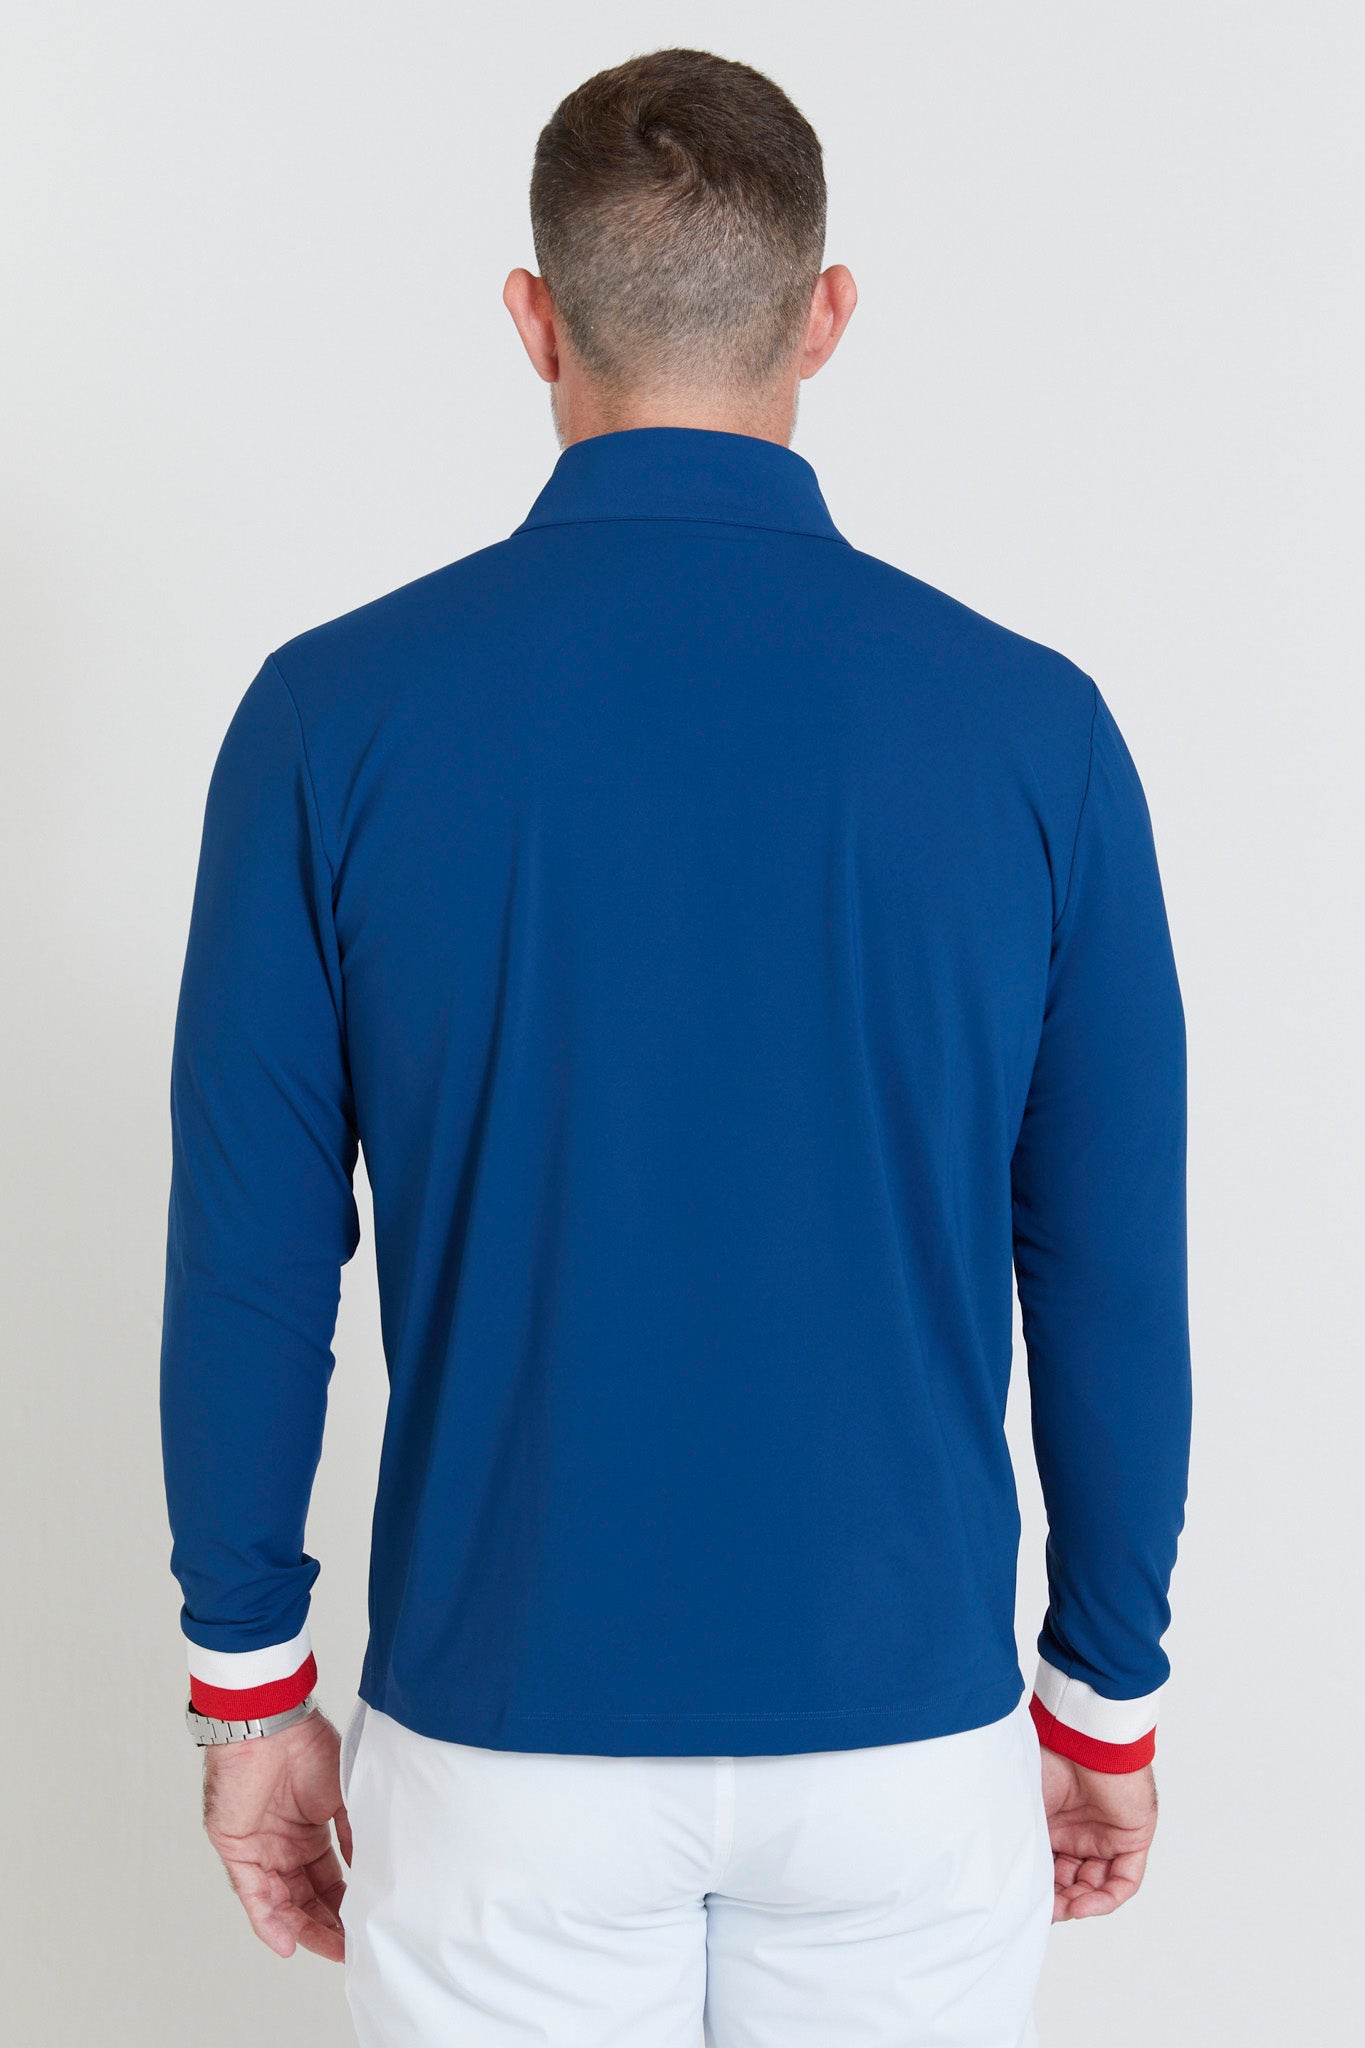 Image of the hubbard quarter zip in admiral ss23